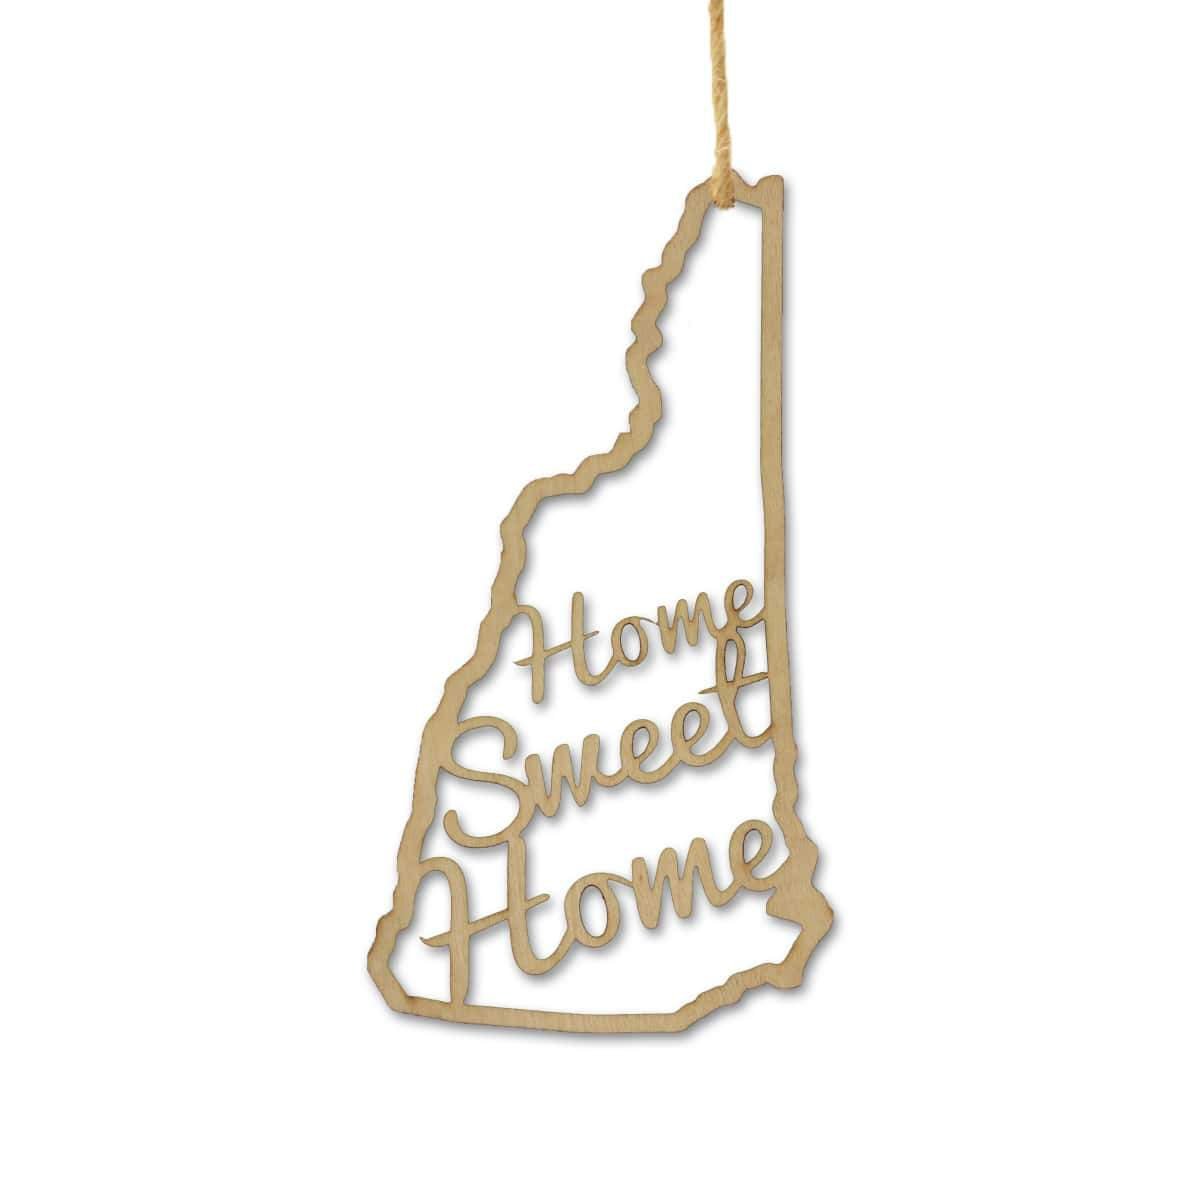 Torched Products Ornaments New Hampshire Home Sweet Home Ornaments (781218807925)